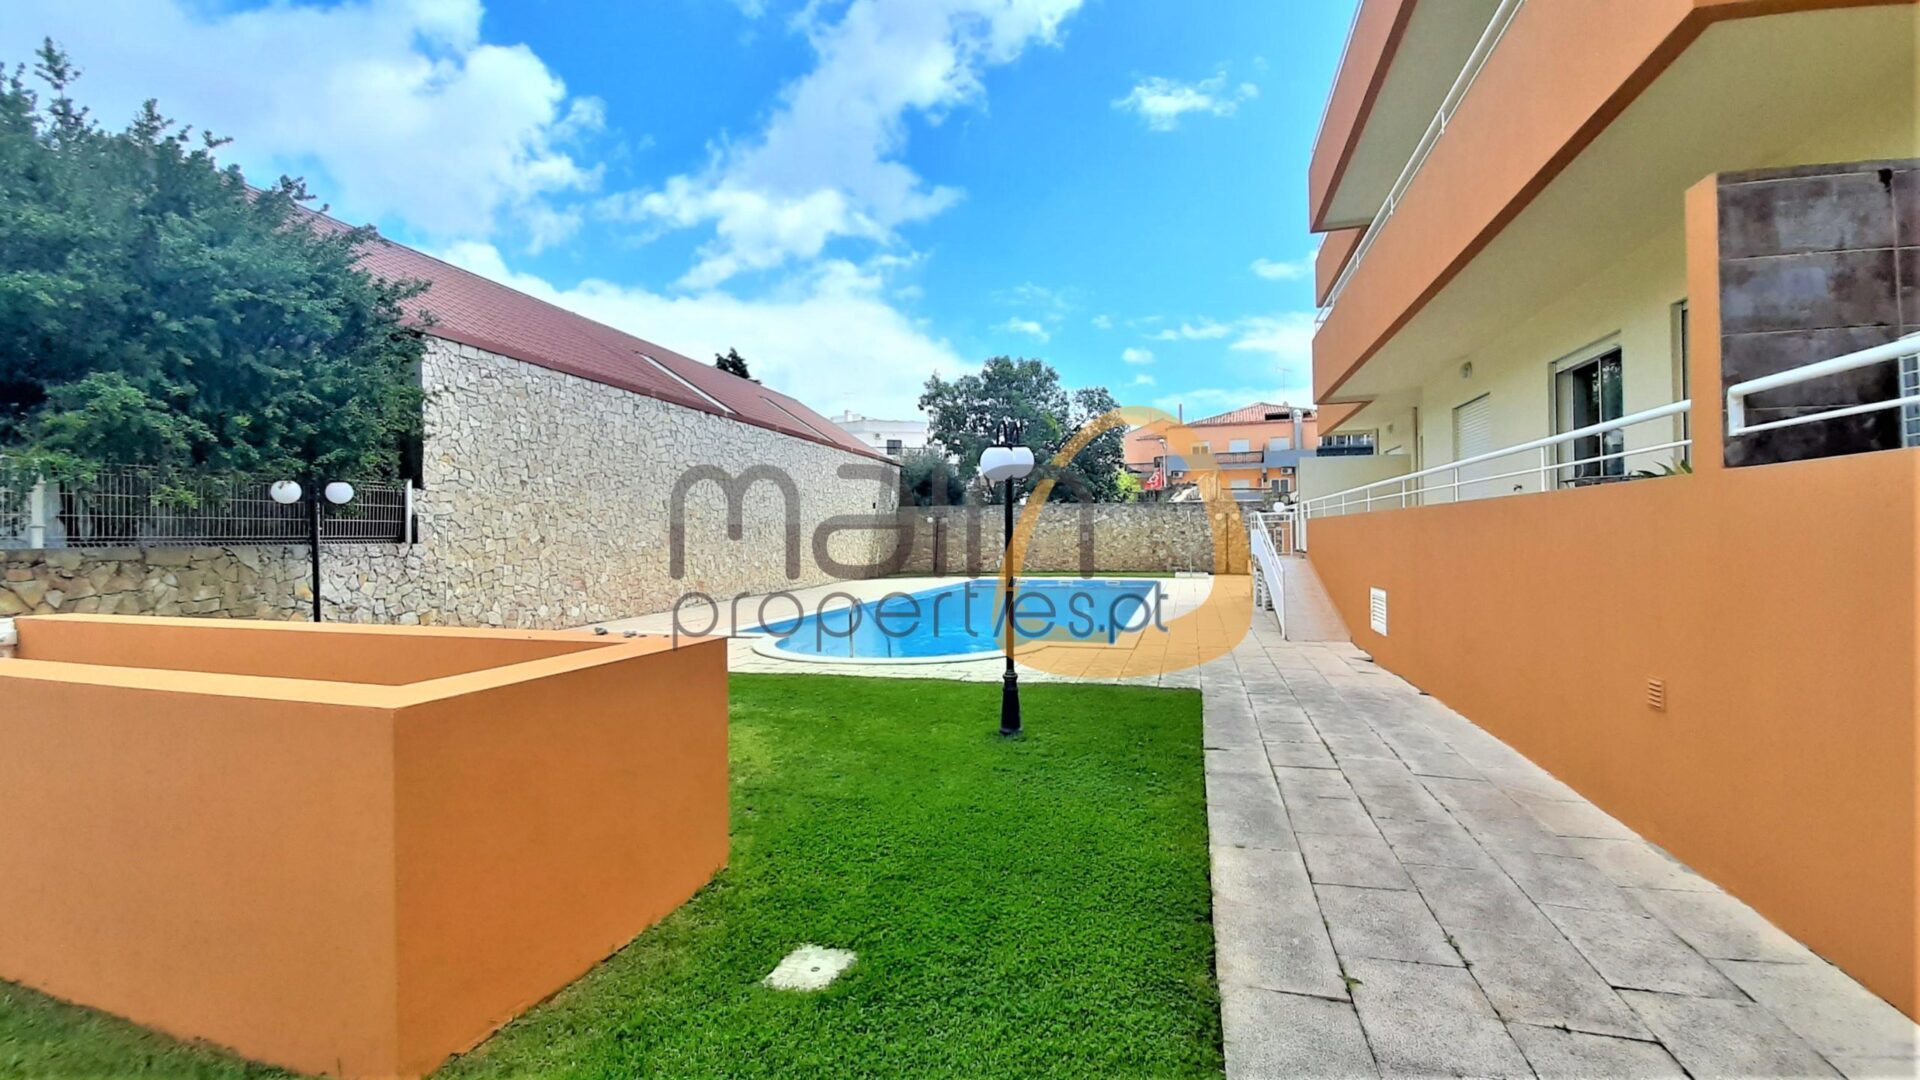 2 bedroom apartment in gated community with swimming pool in São Brás de Alportel